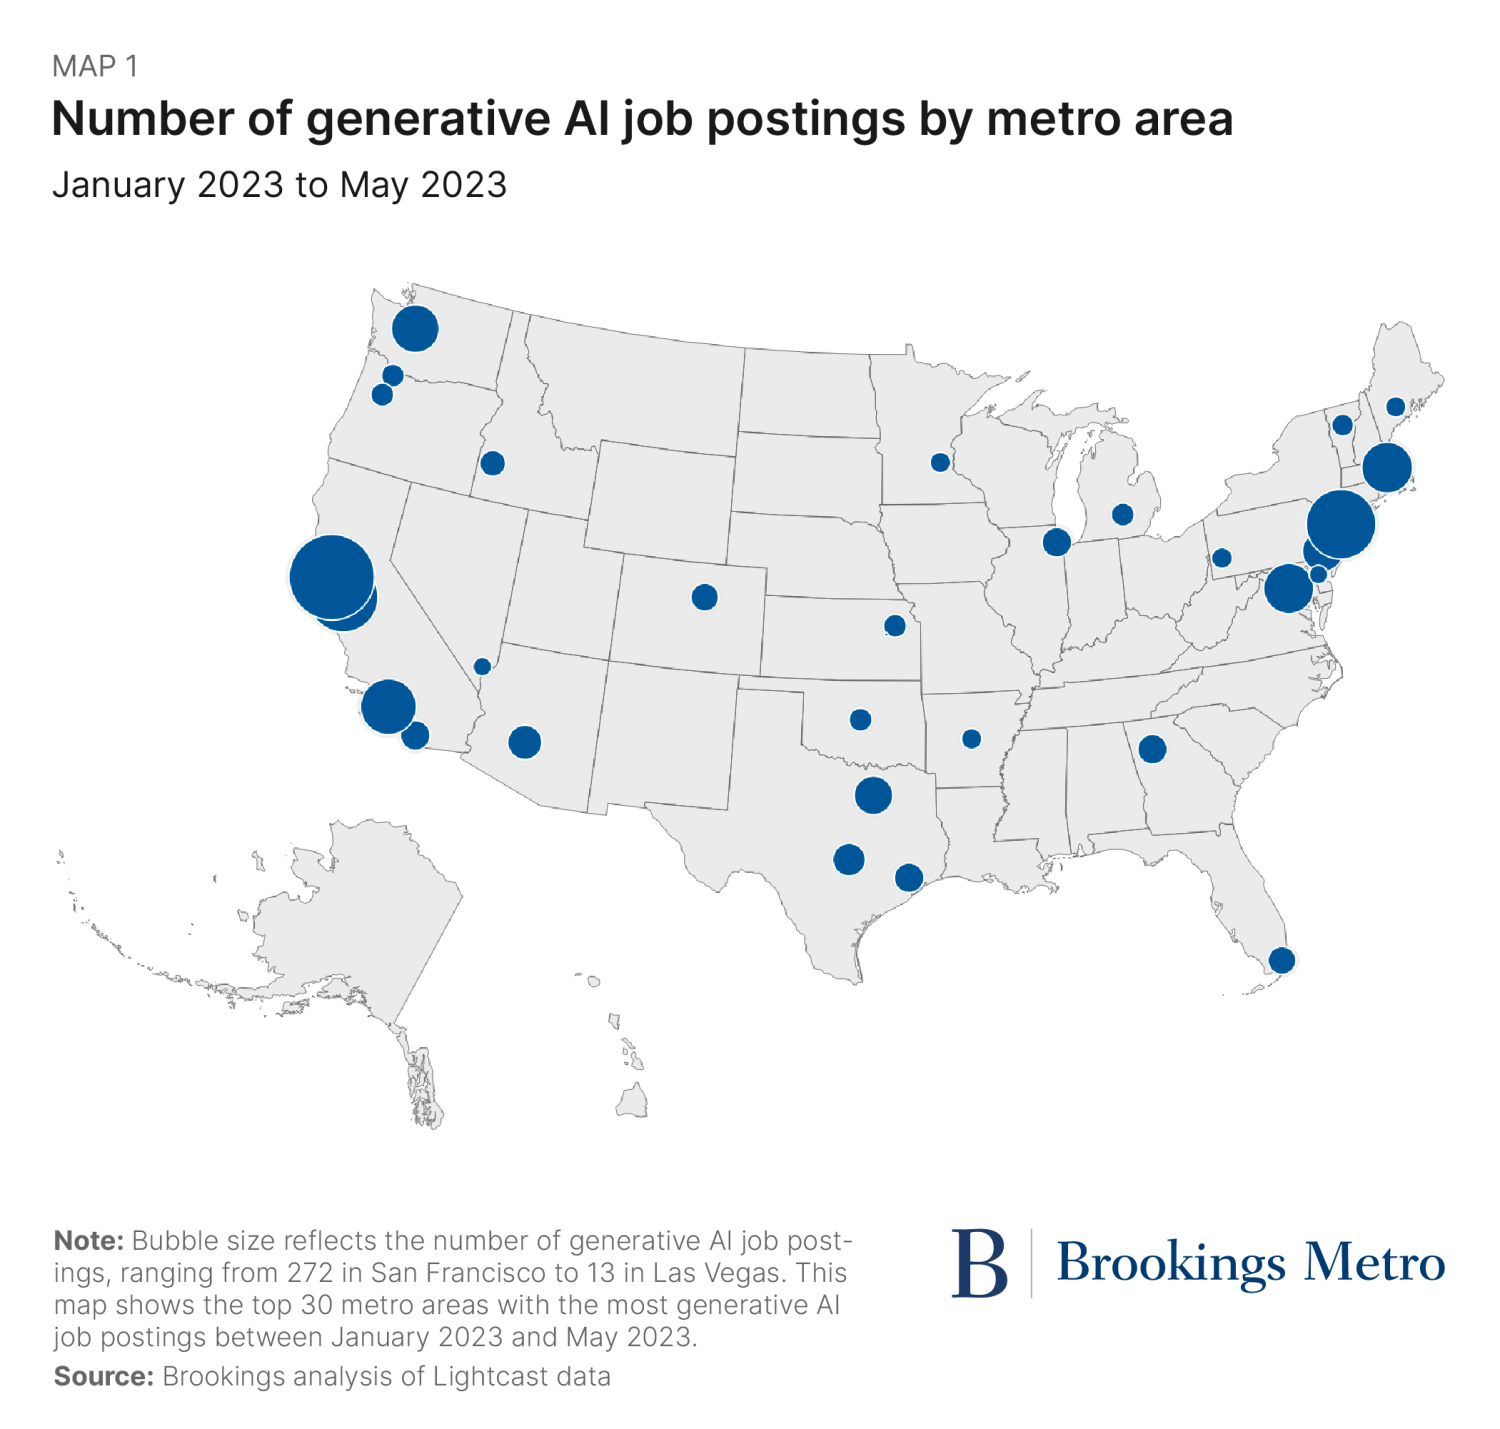 Map 1. Number of generative AI job postings by metro area. Jan 2023 to May 2023